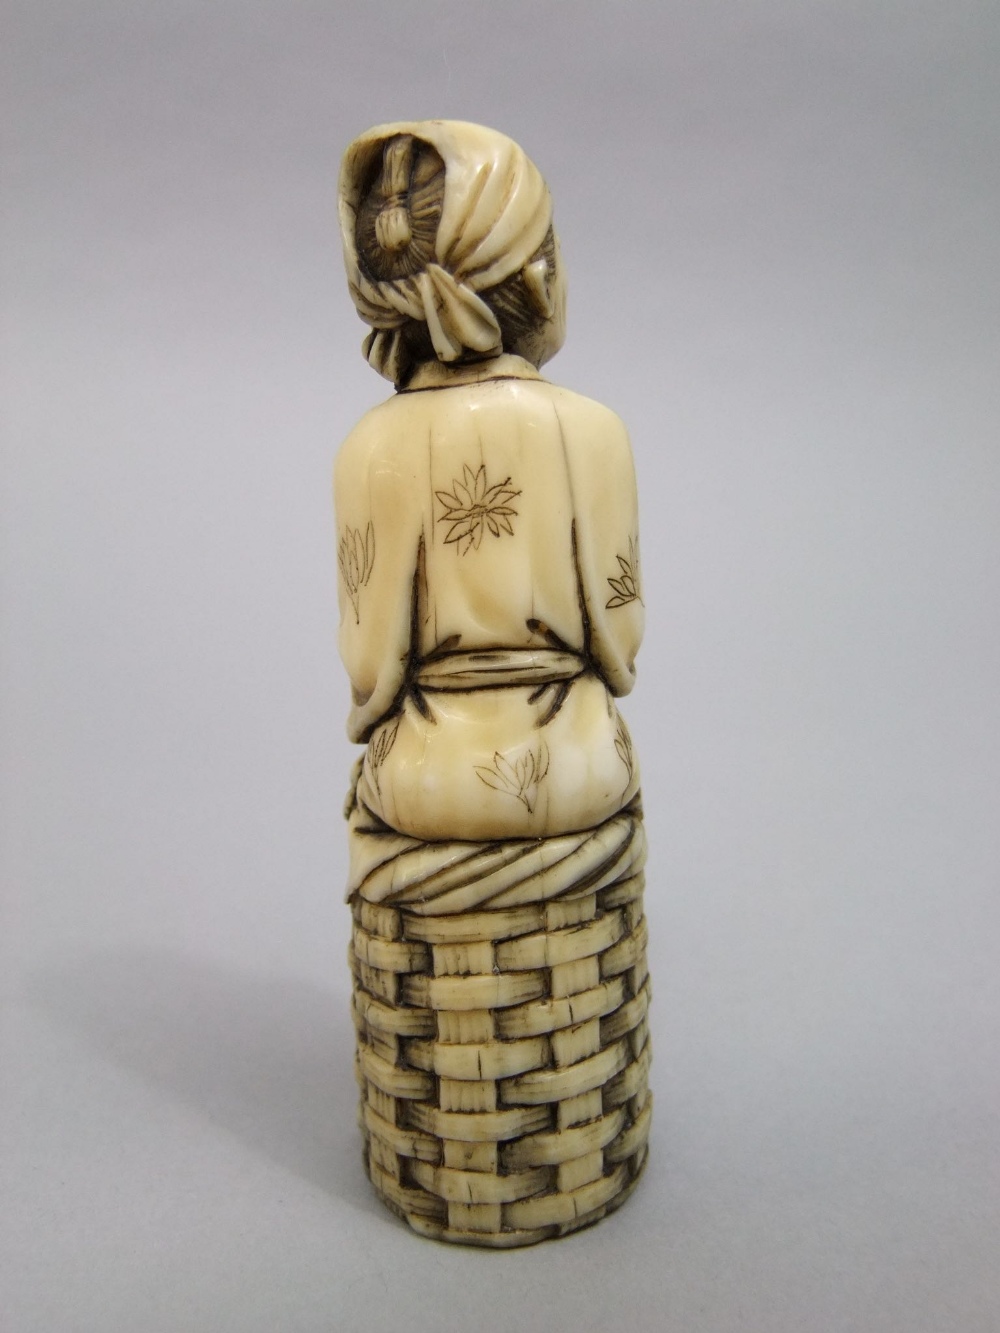 An old Japanese ivory figure of a man, eating with chop sticks while seated on a basket, 10 cm - Image 2 of 4